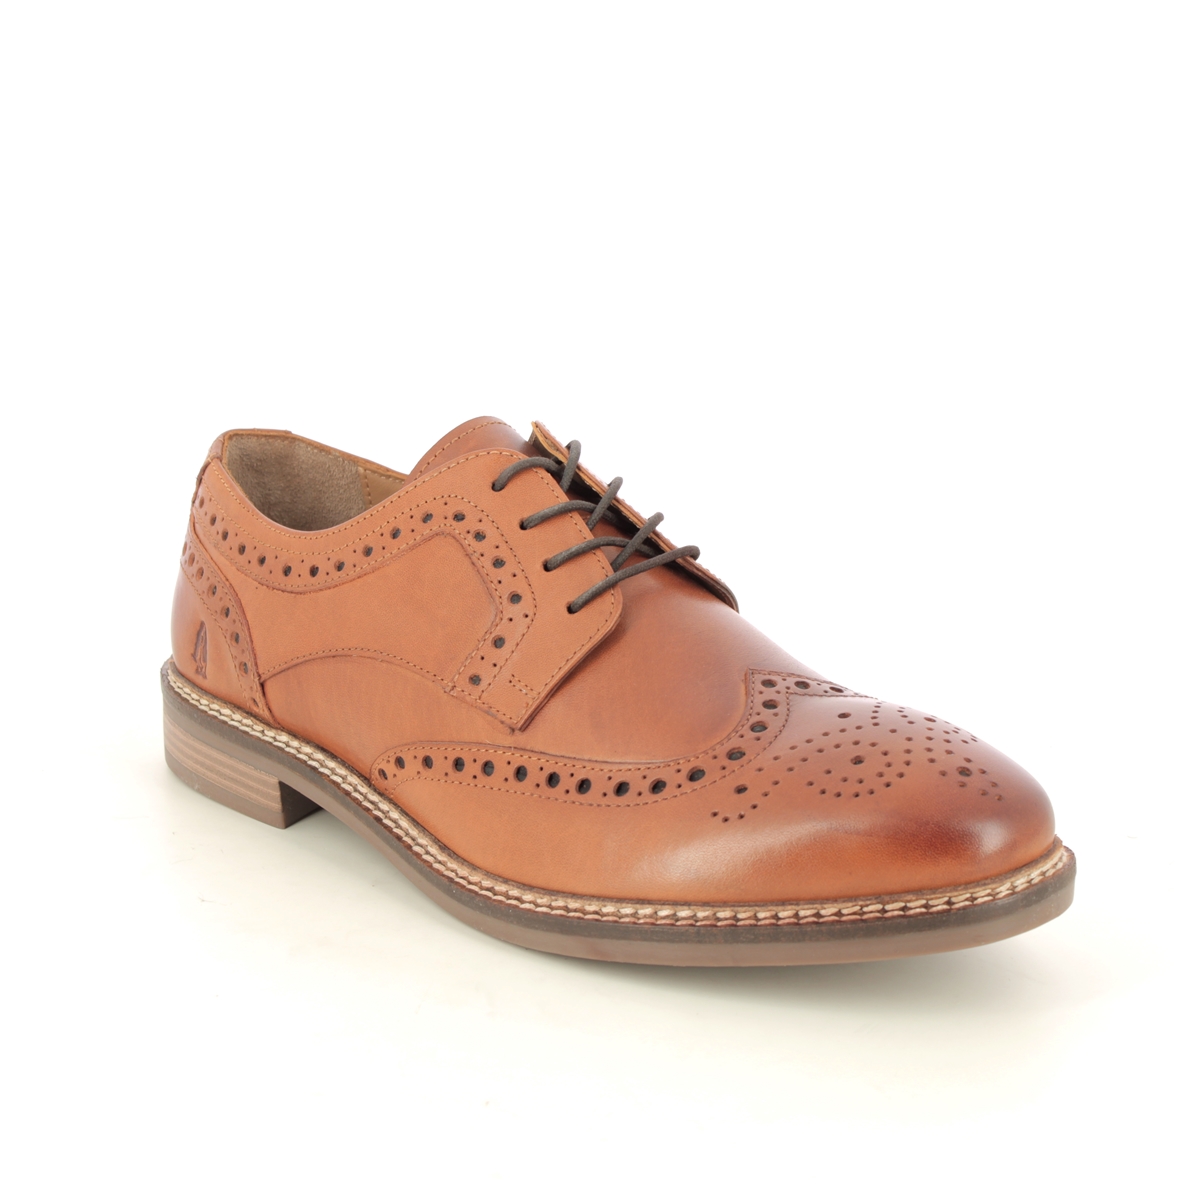 Hush Puppies - Bryson (Tan Leather ) 12355-11 In Size 8 In Plain Tan Leather